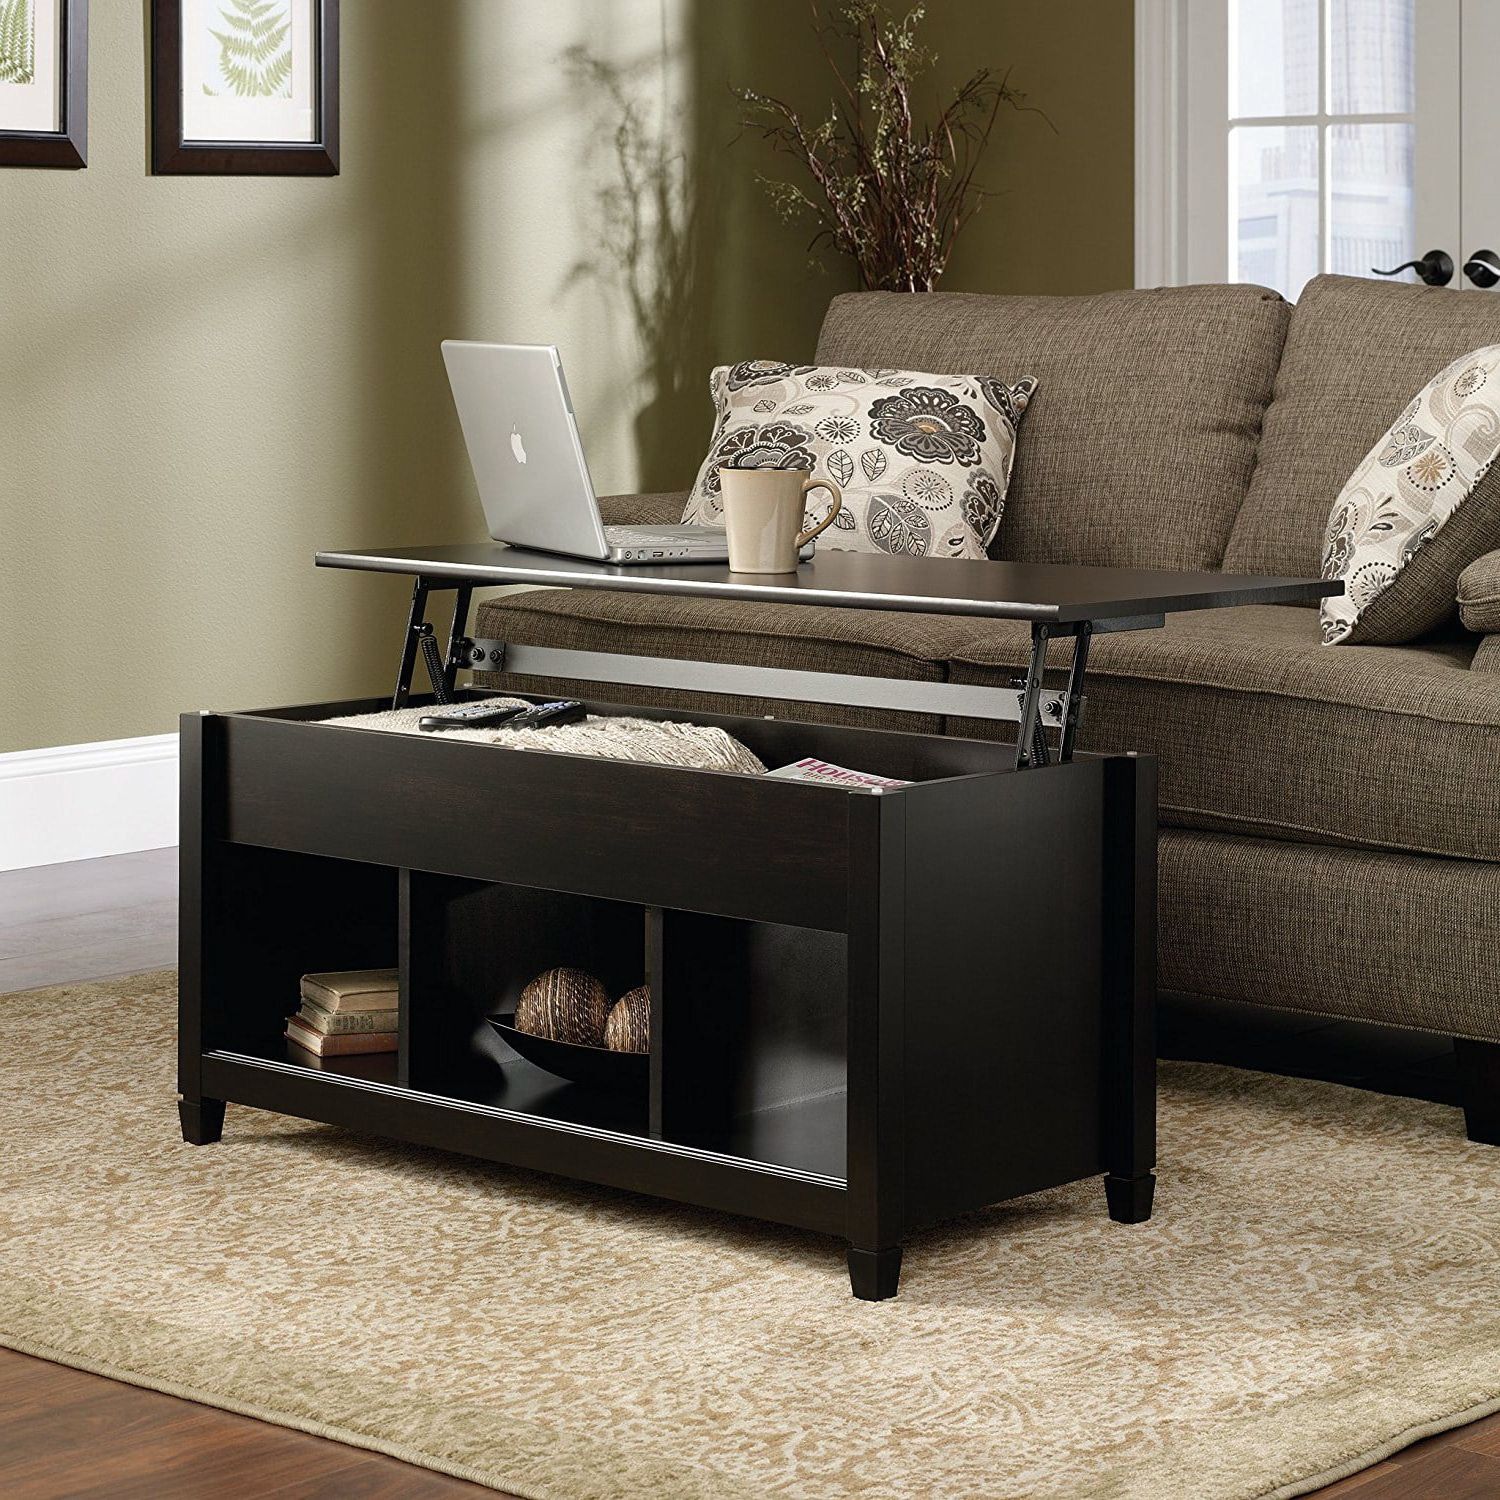 2019 Zimtown Lift Up Top Coffee Table With Hidden Compartment End Rectangle In Lift Top Coffee Tables With Hidden Storage Compartments (View 5 of 15)